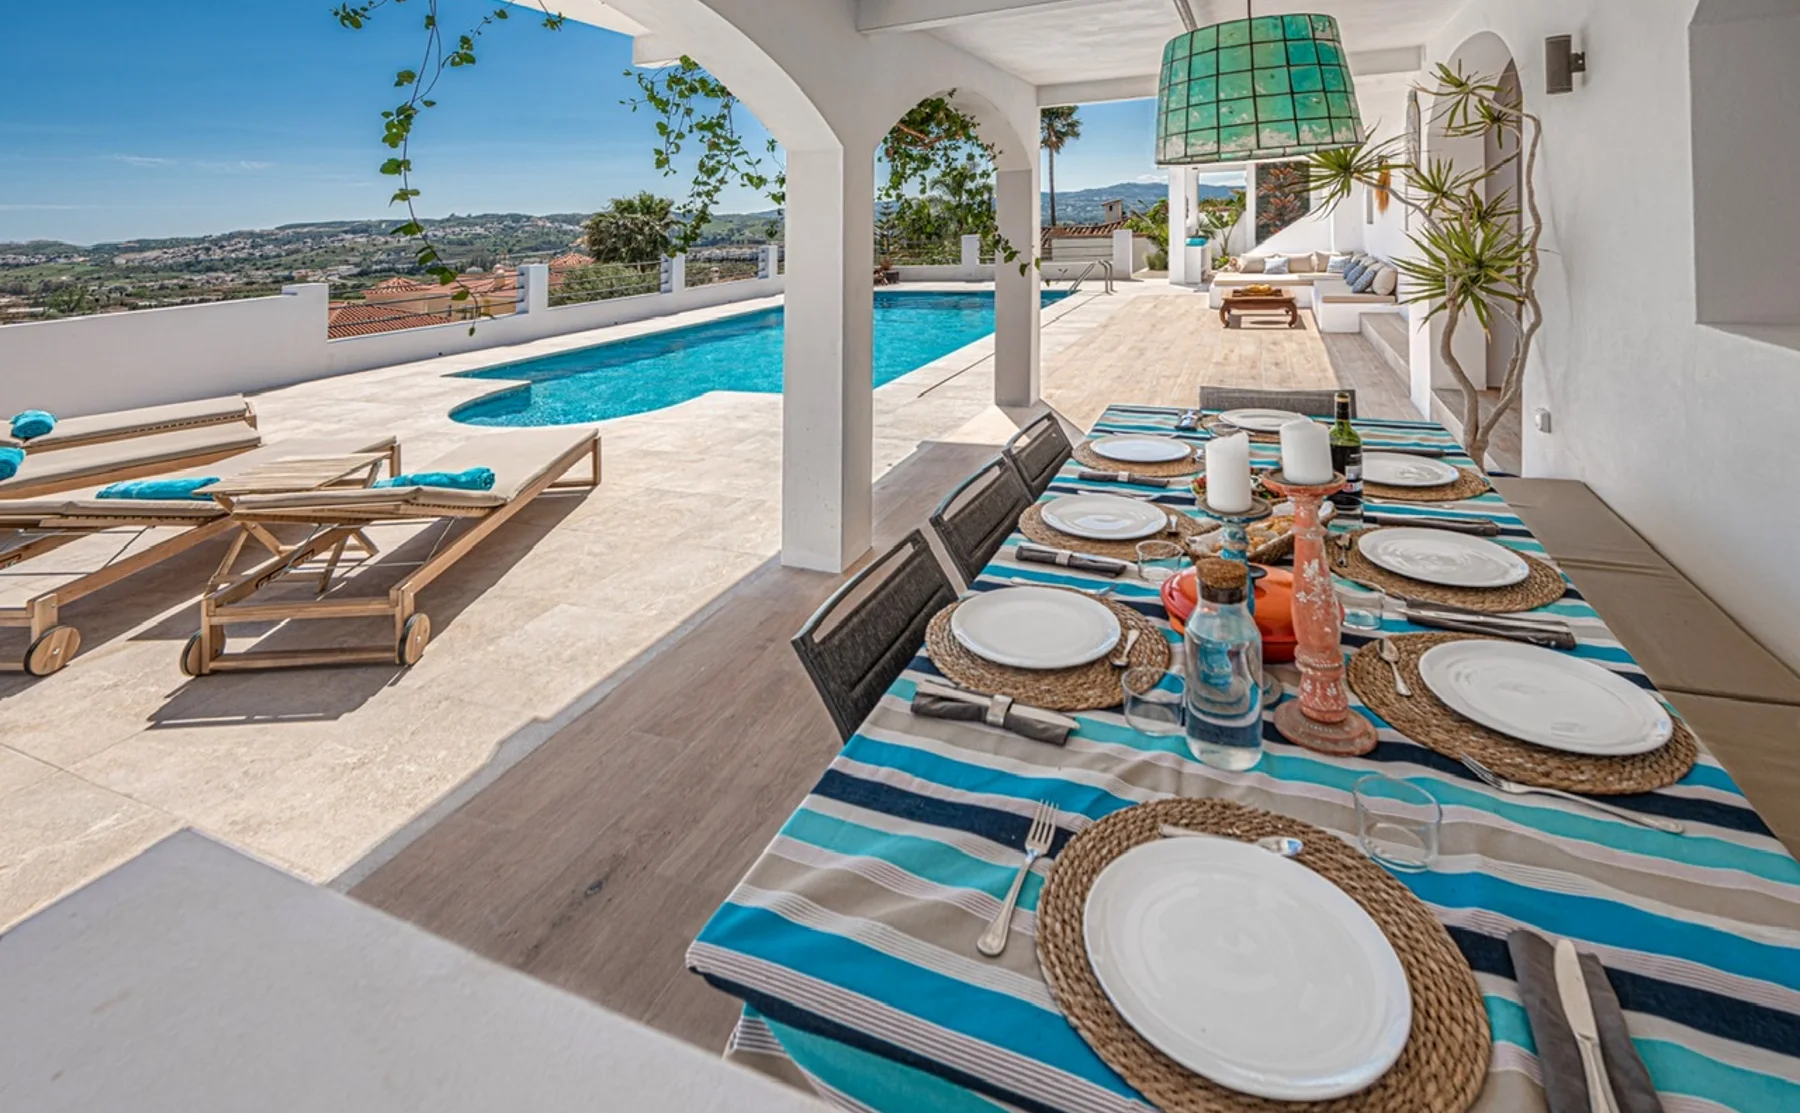 Andalucian lunch with breathtaking views  - 1482539